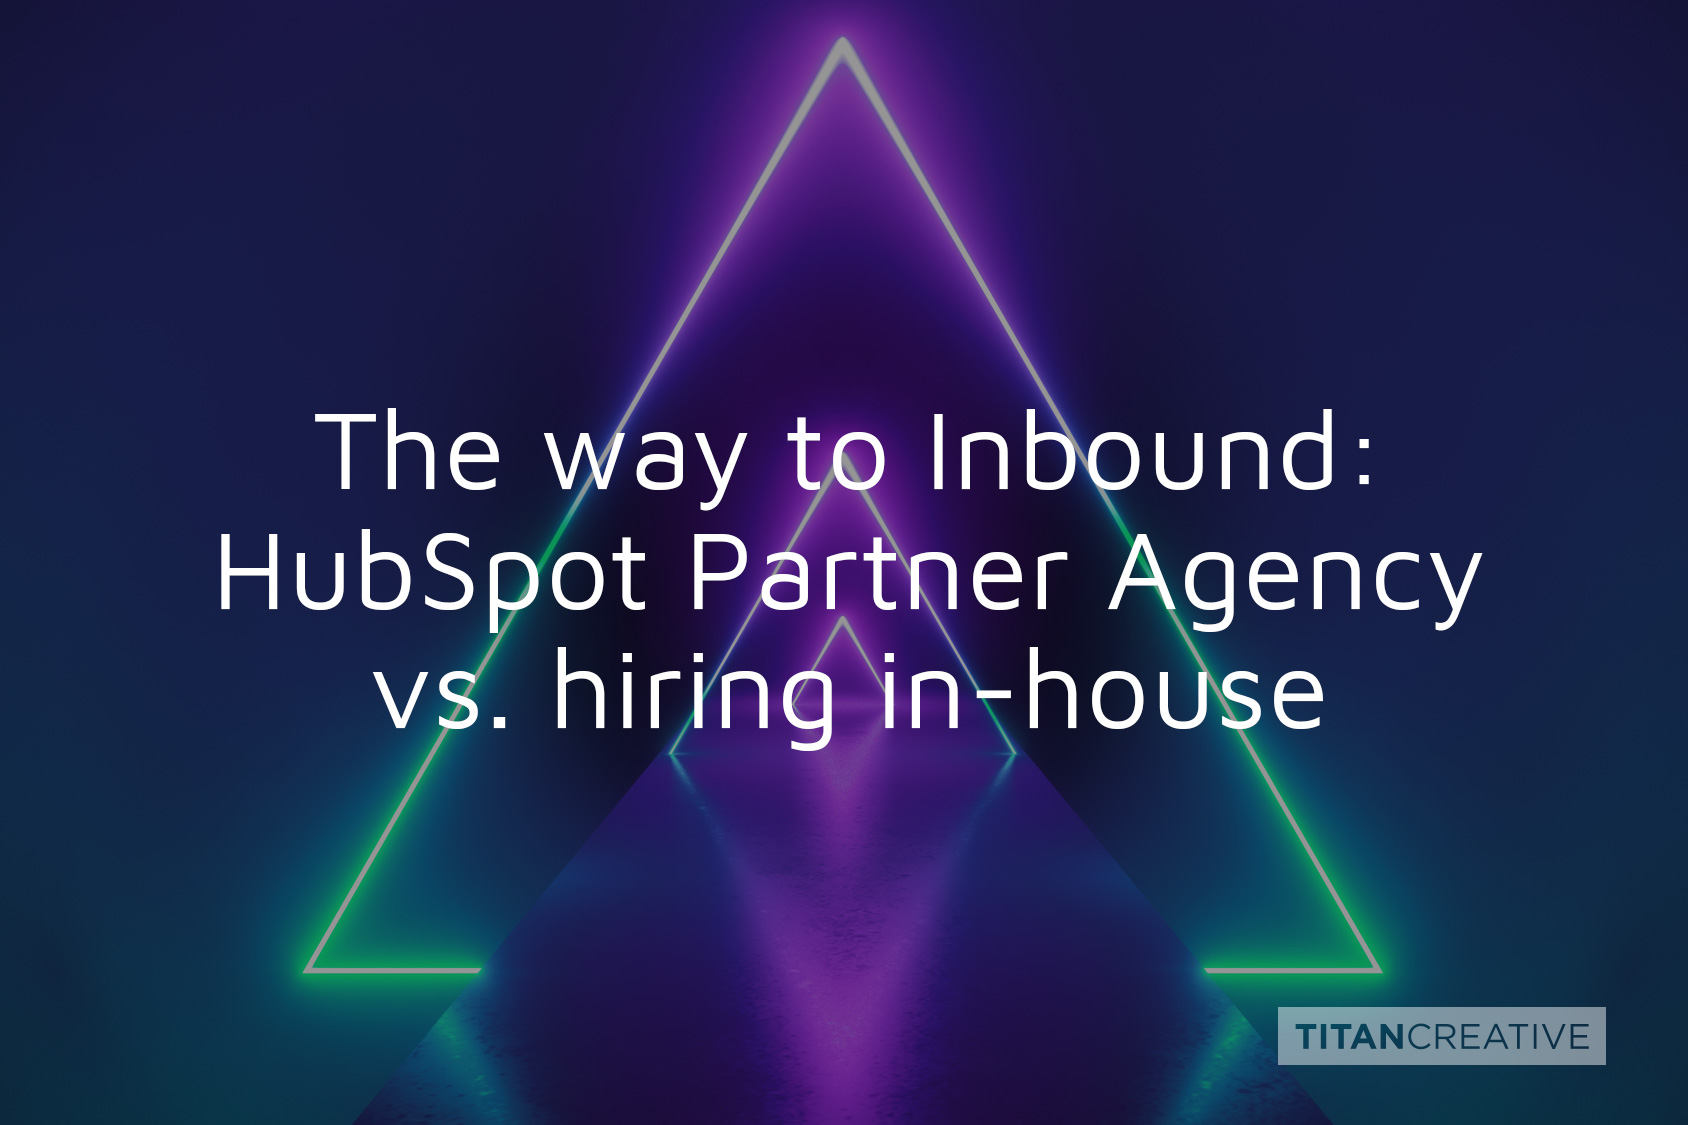 The way to Inbound: Working with a HubSpot Partner Agency vs. hiring in-house